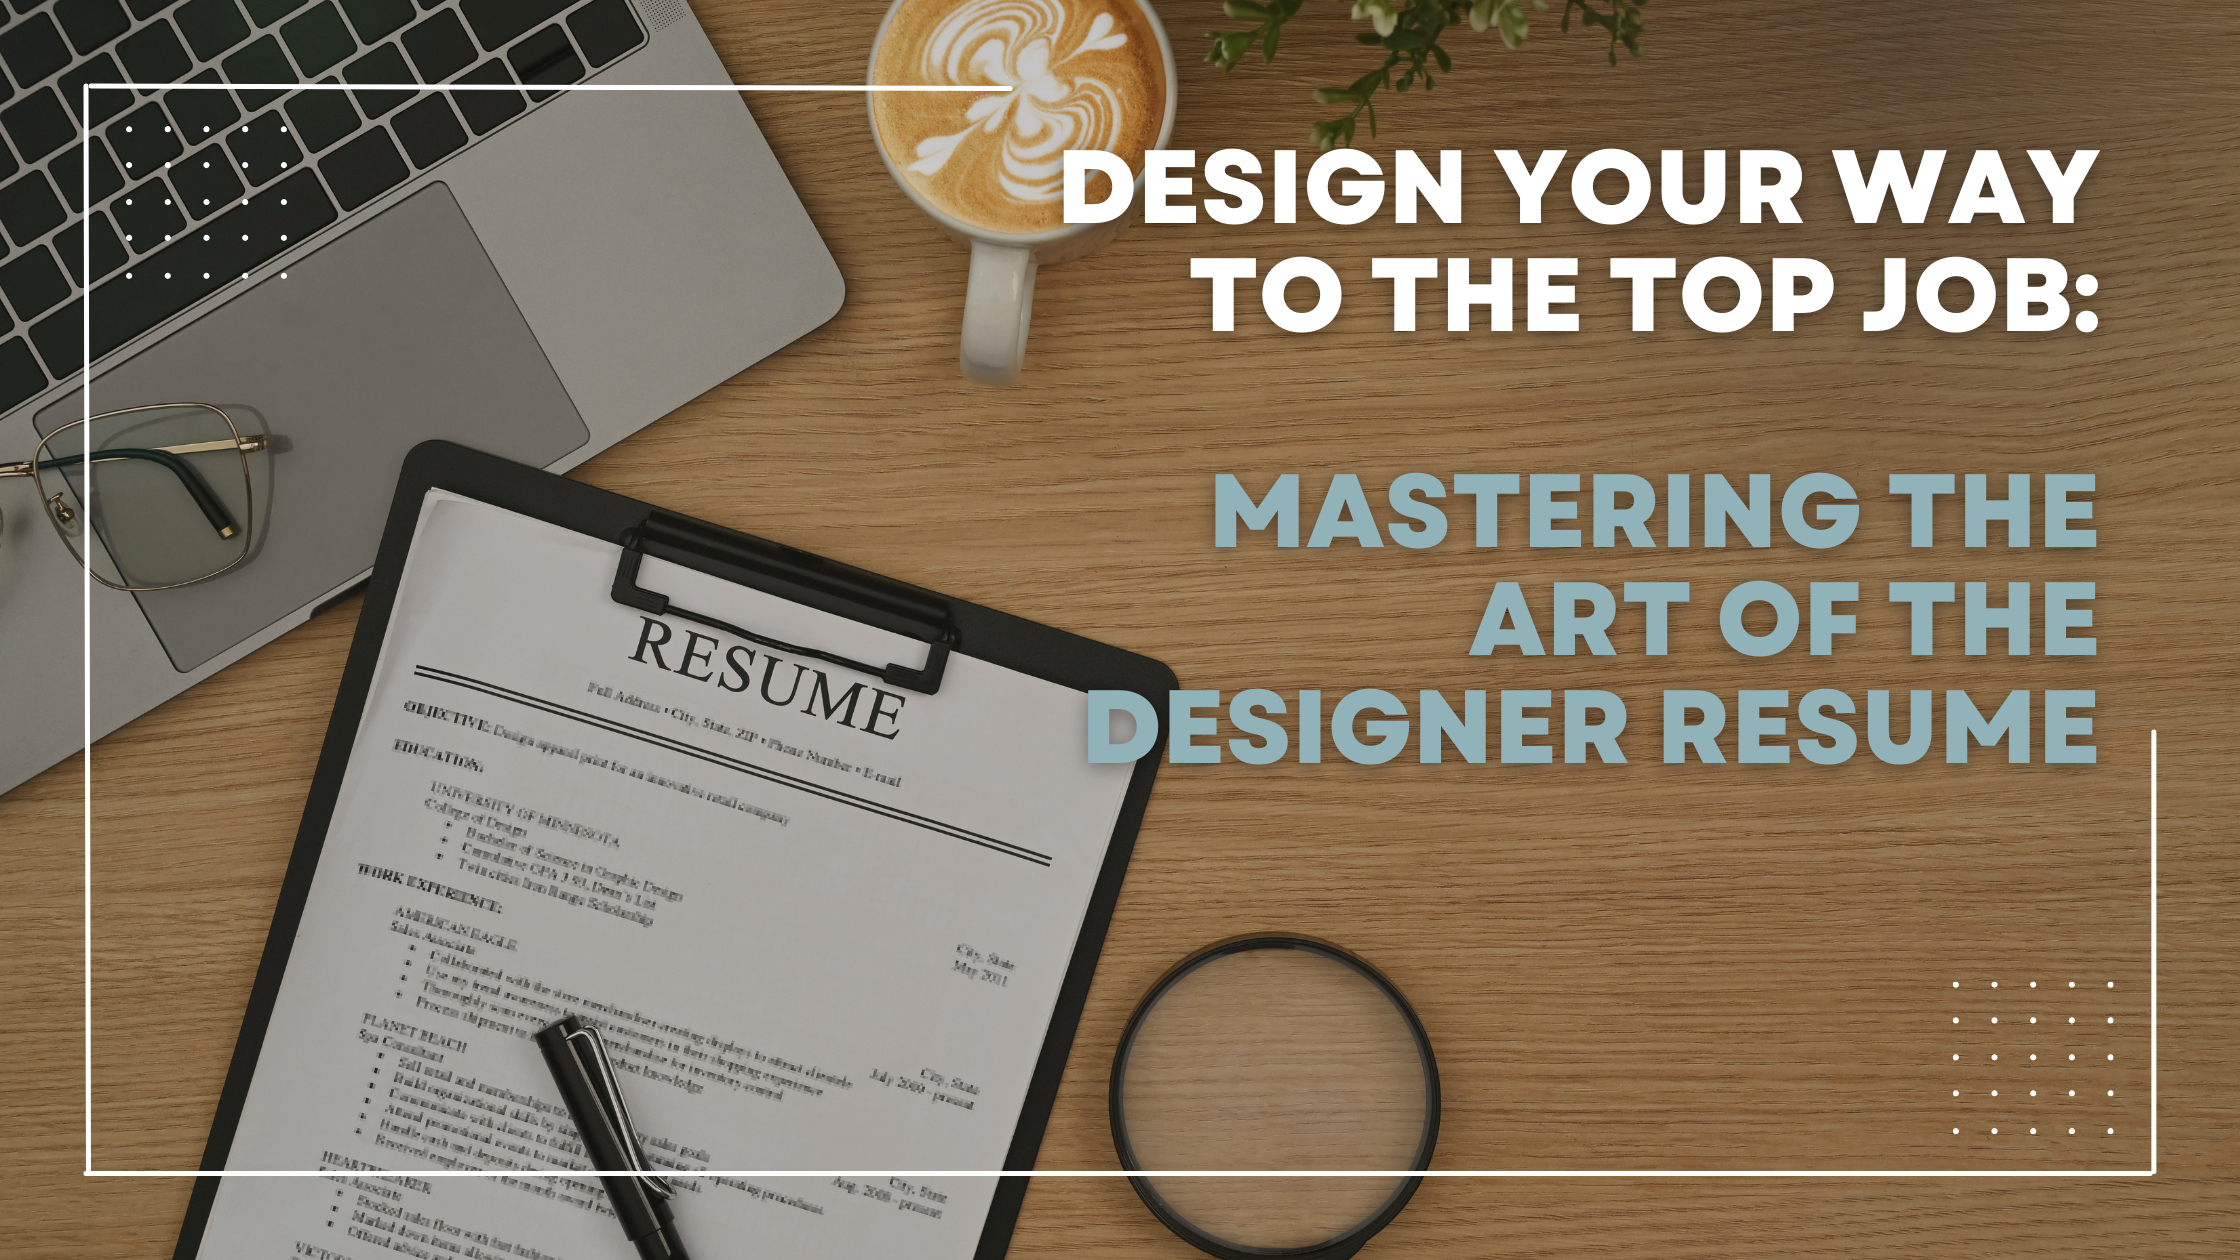 Featured image for “Design your Way to the Top Job: Mastering the Art of the Designer Resume”